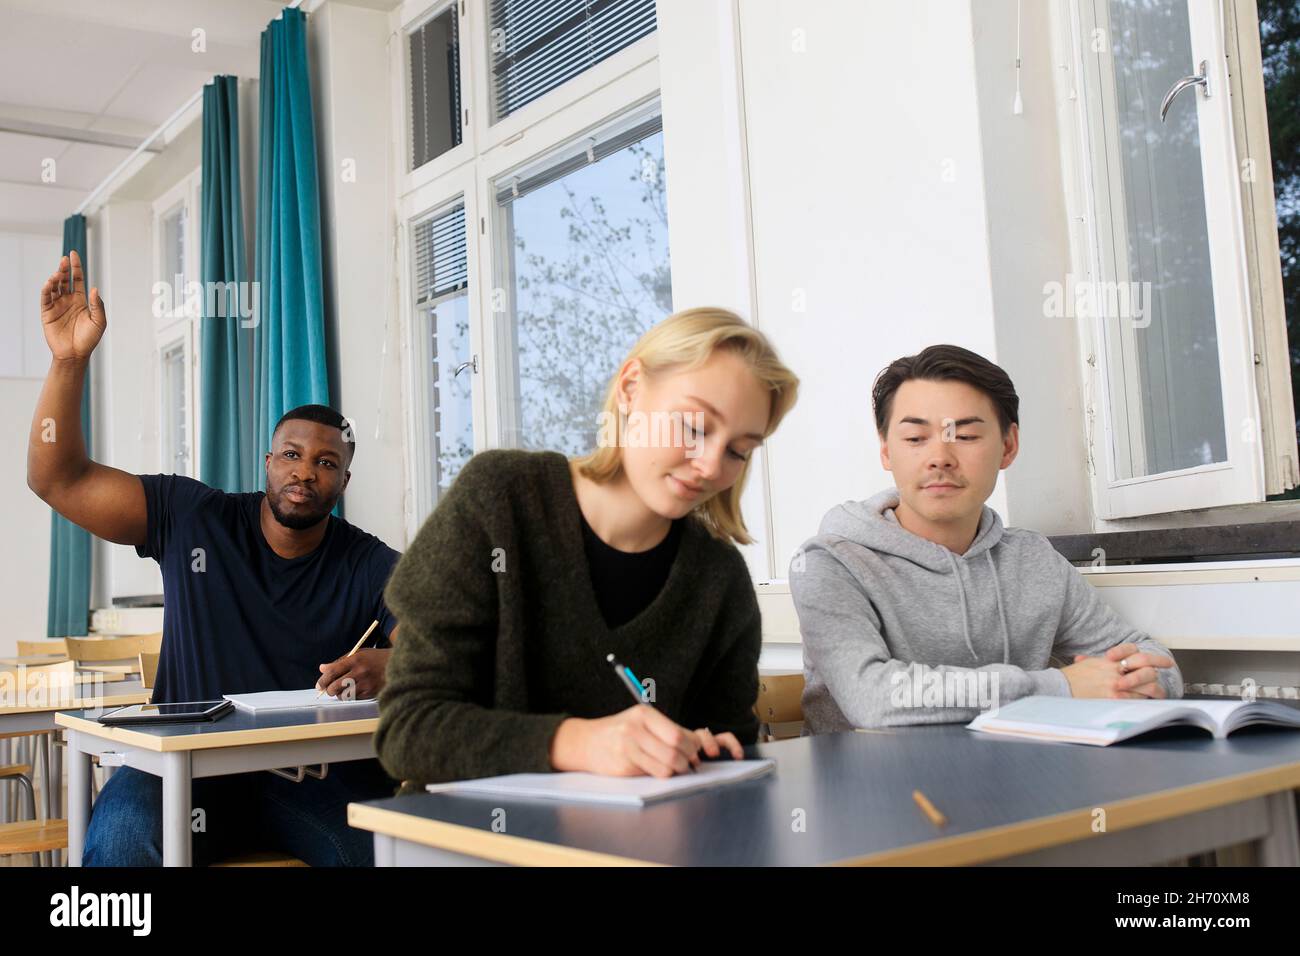 Smiling students in classroom Stock Photo